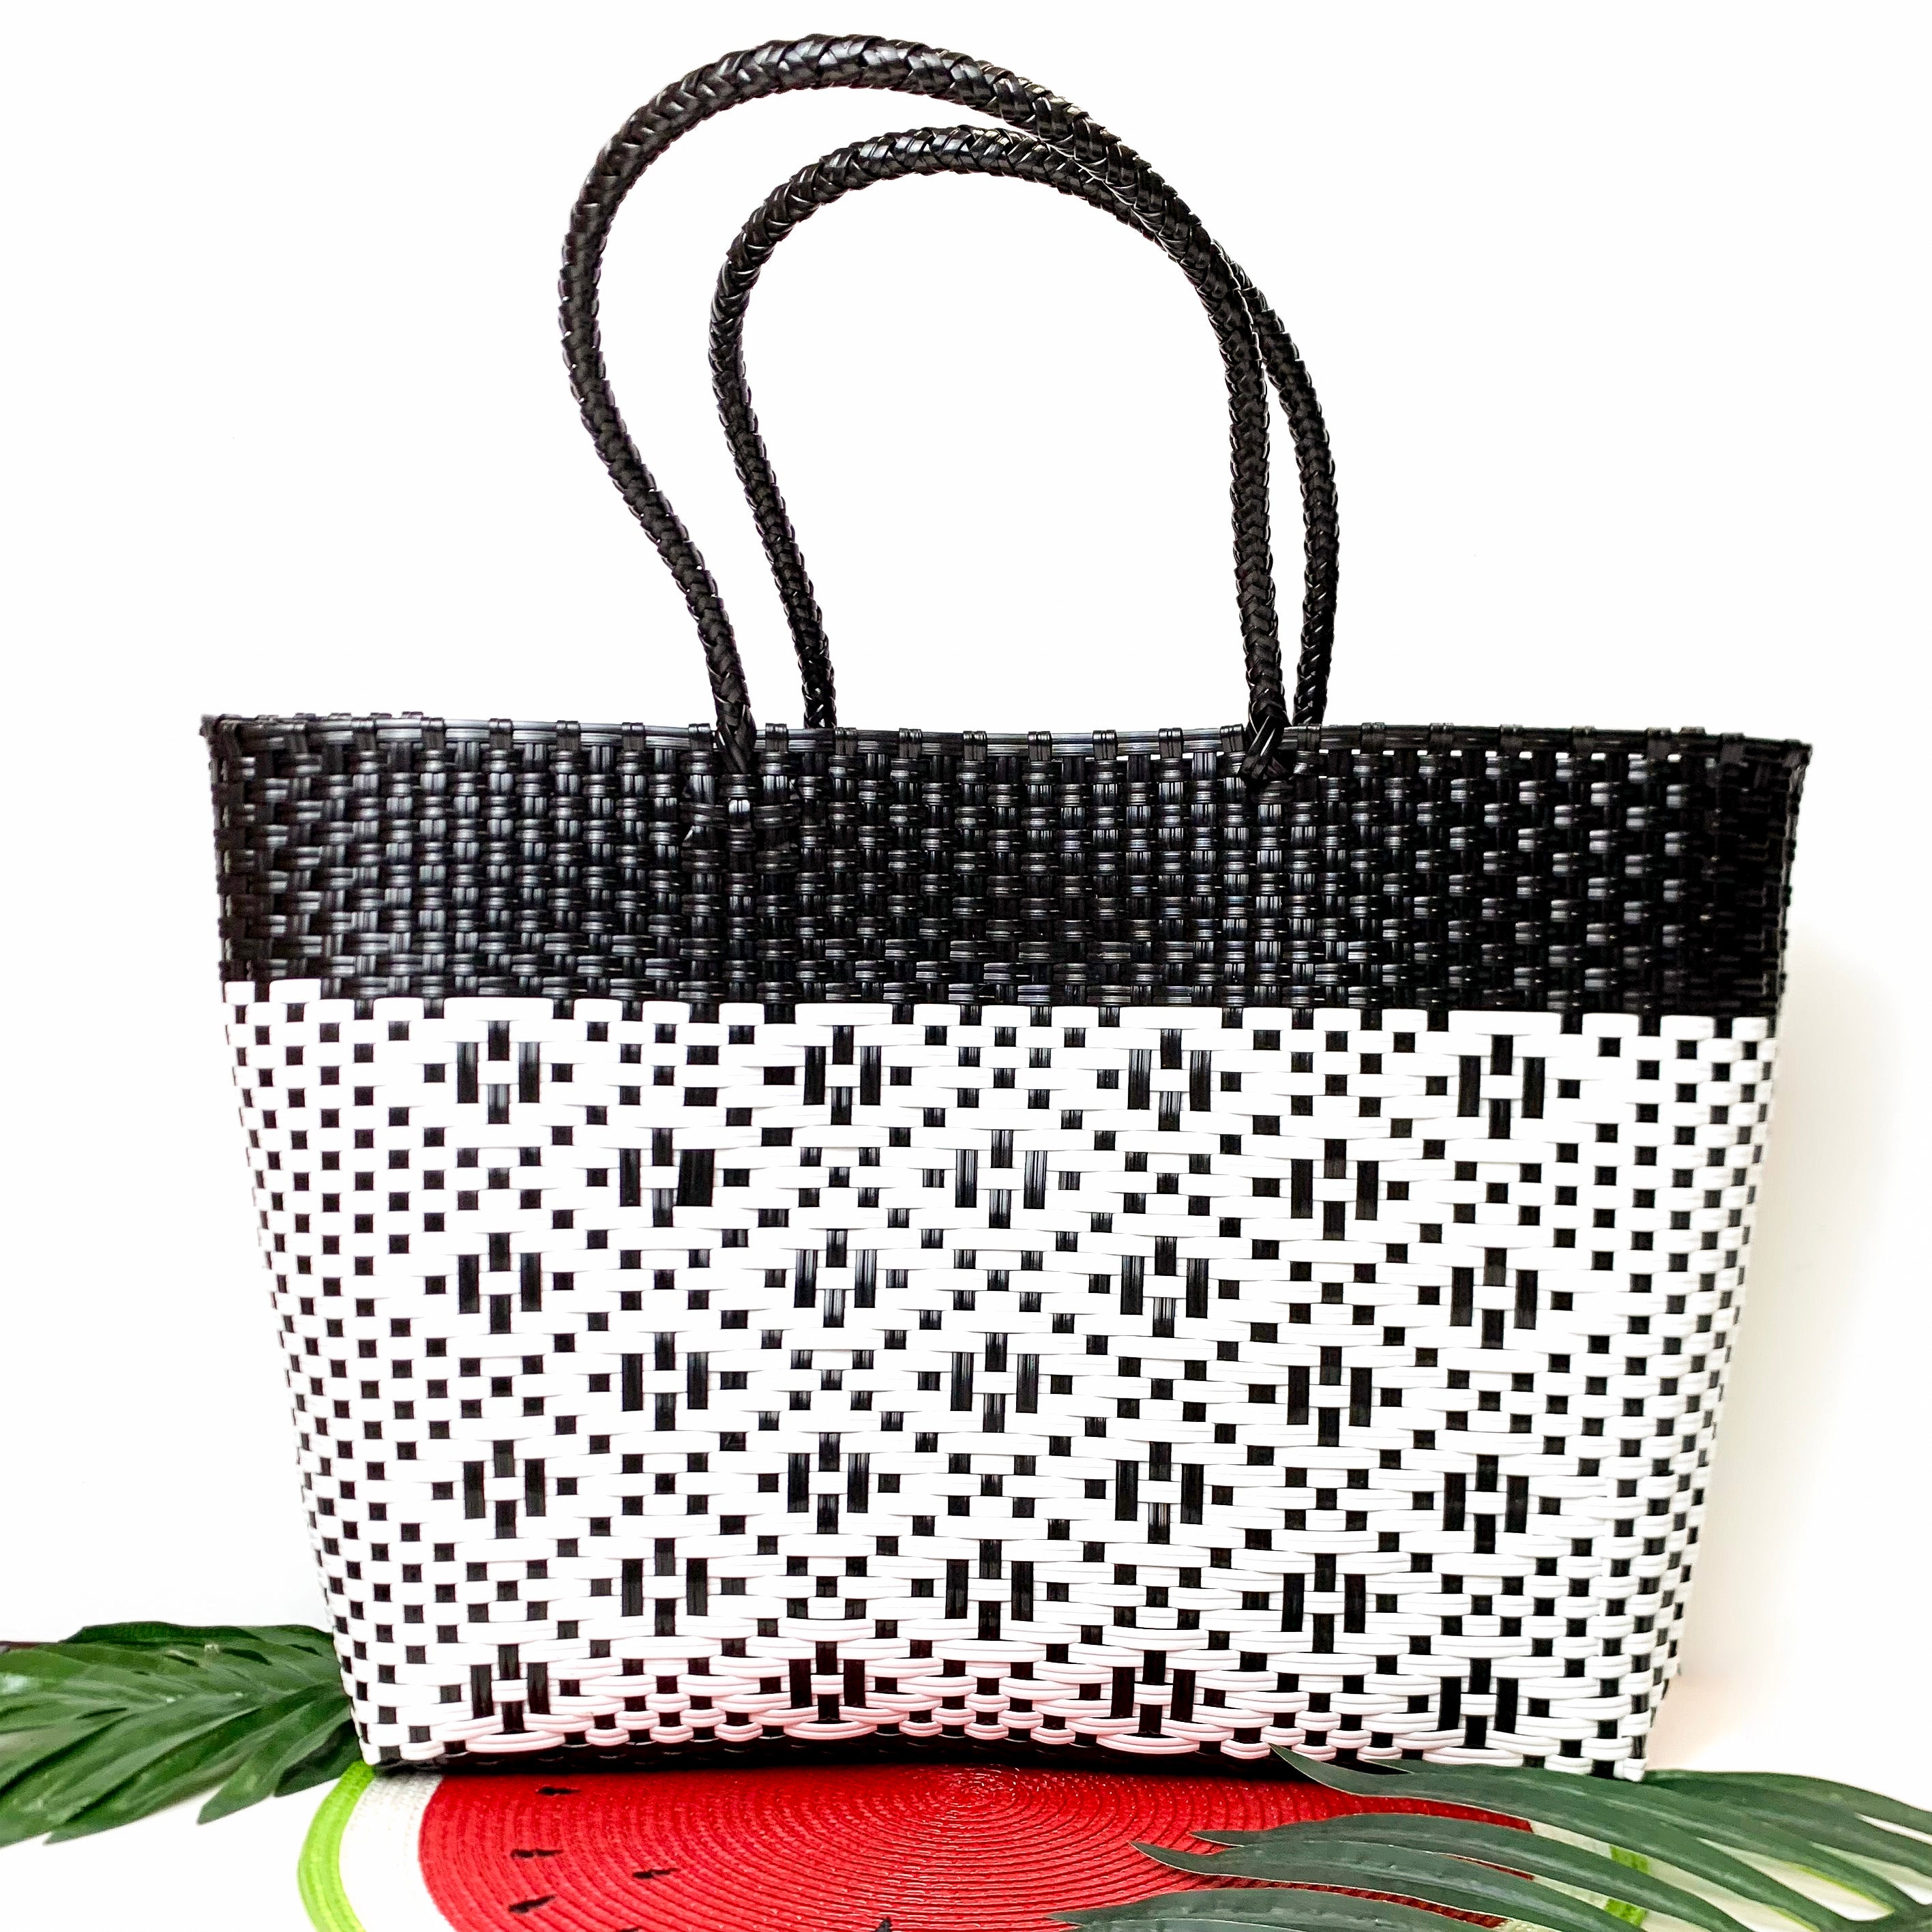 Sonoran Sky Market Tote Bag in Black and White - Giddy Up Glamour Boutique